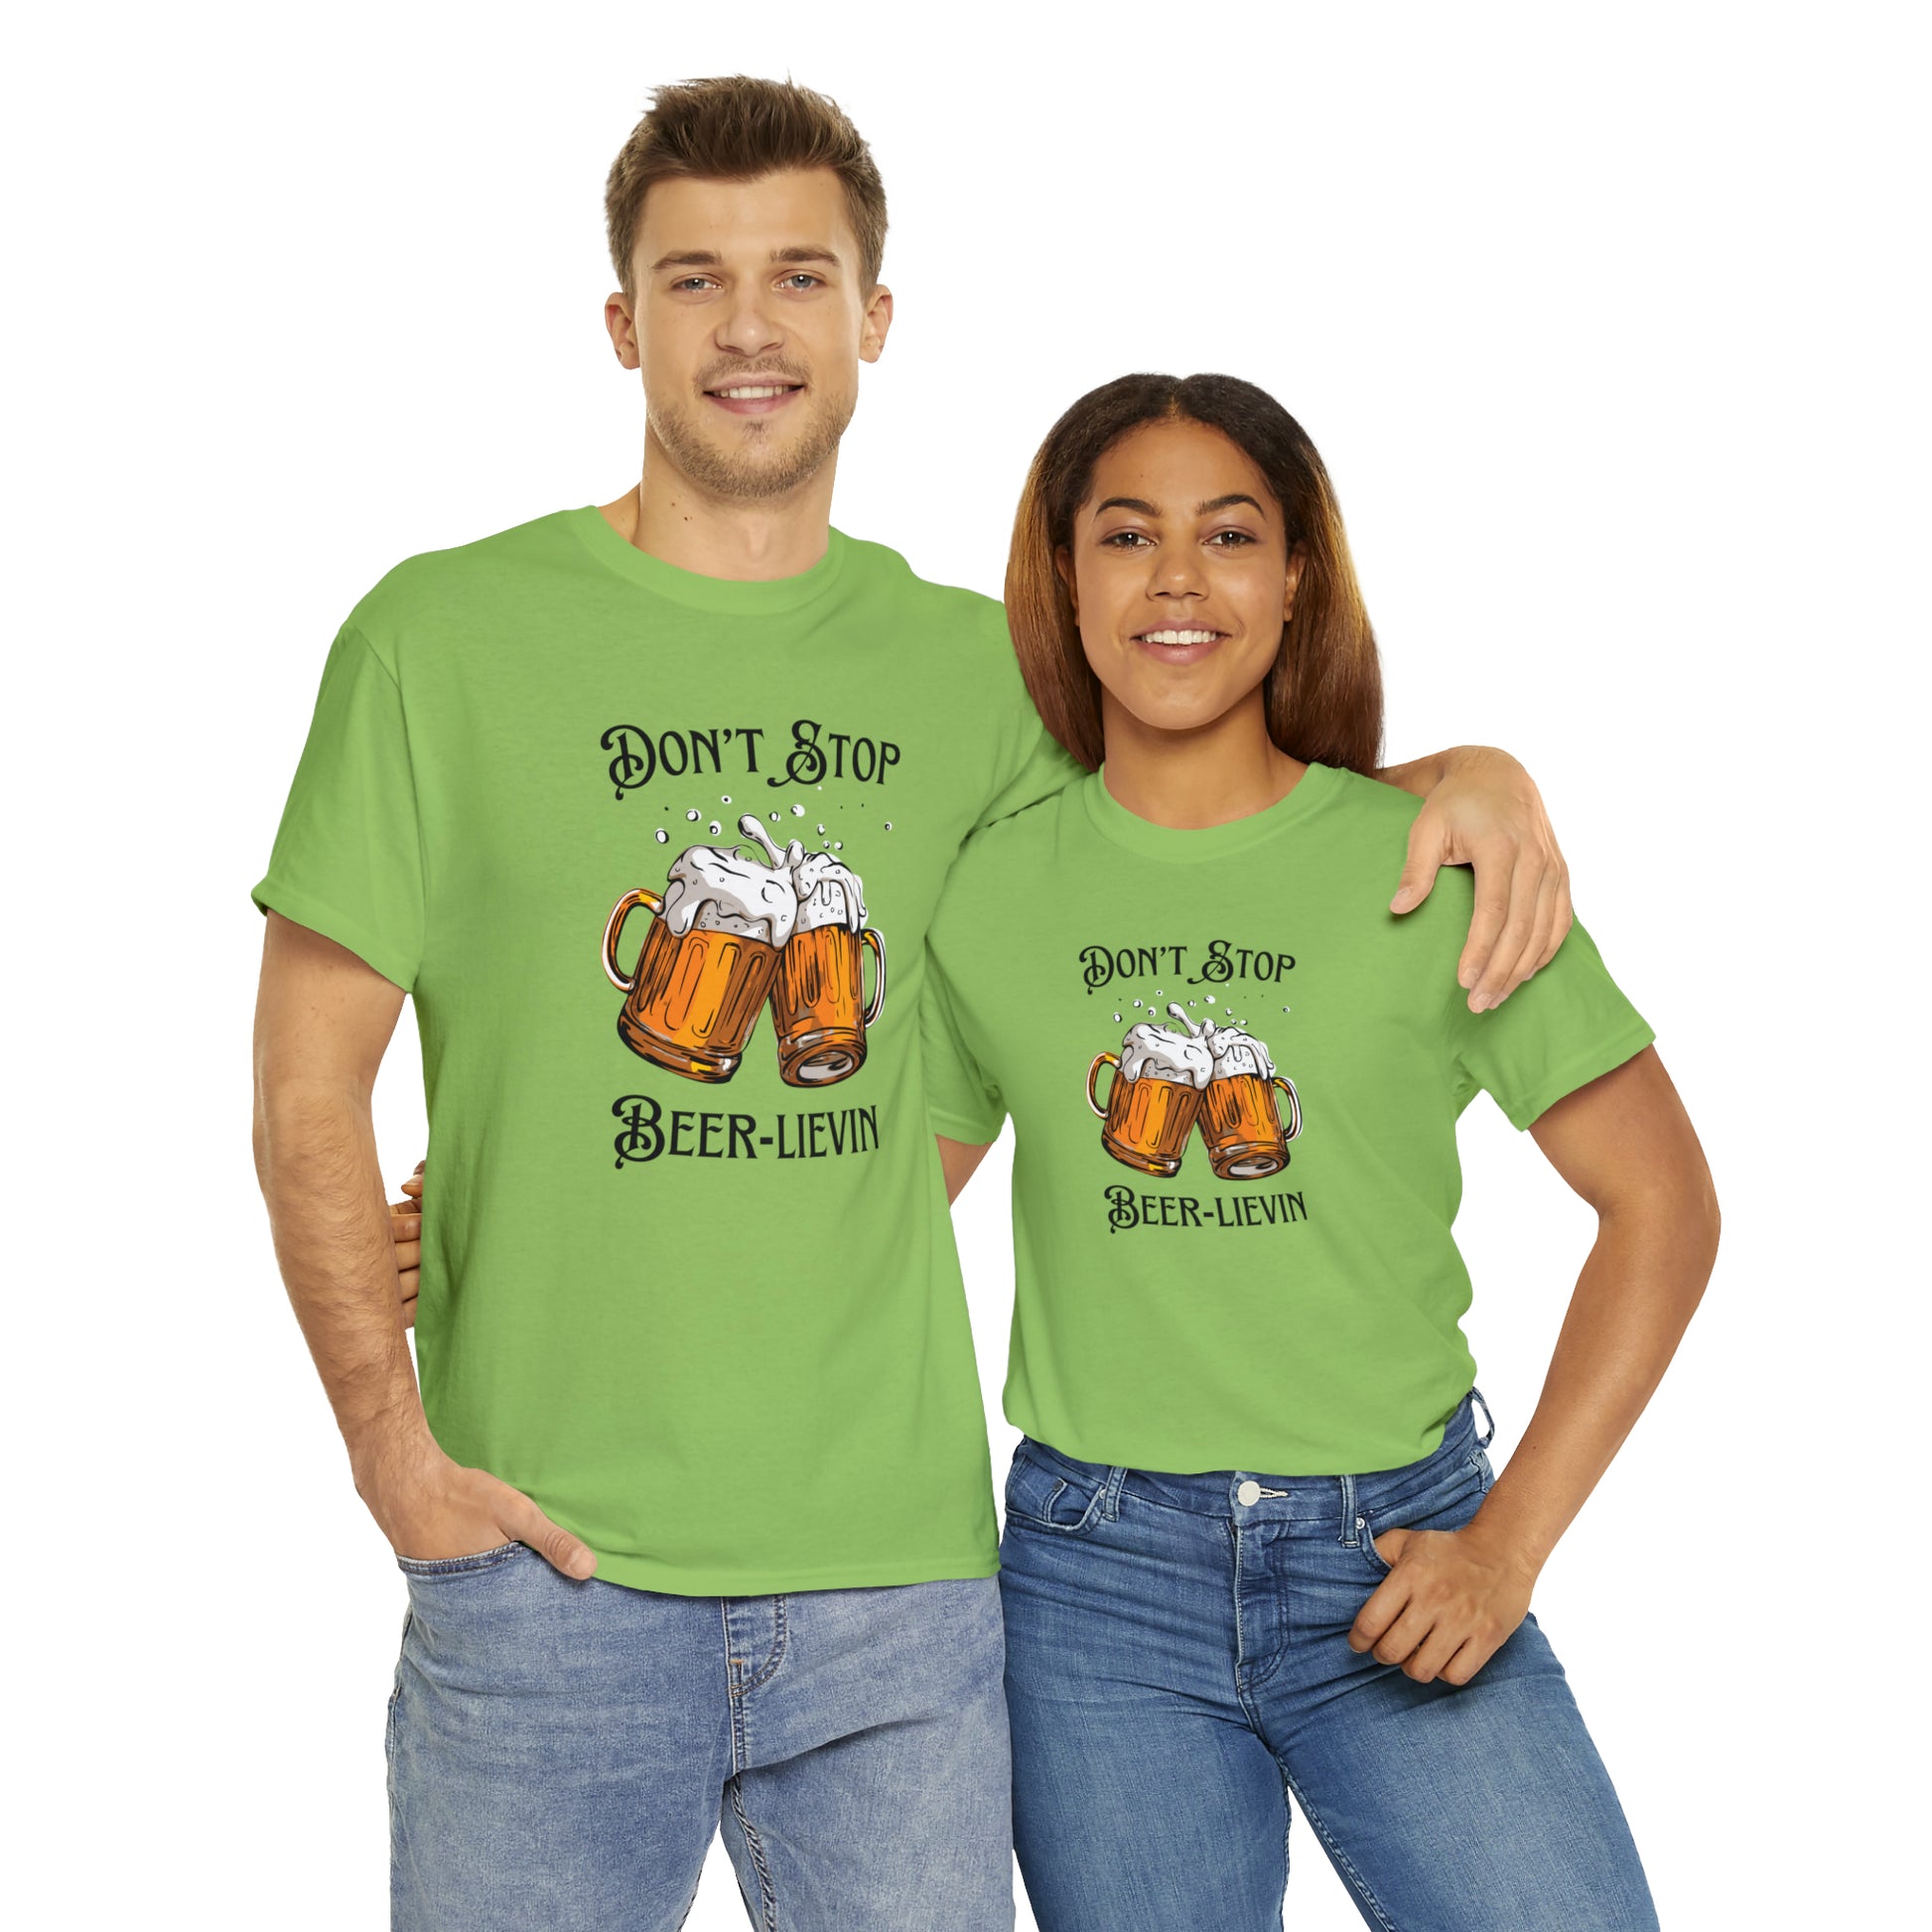 "Don't Stop Beer-lievin" T-Shirt - Weave Got Gifts - Unique Gifts You Won’t Find Anywhere Else!